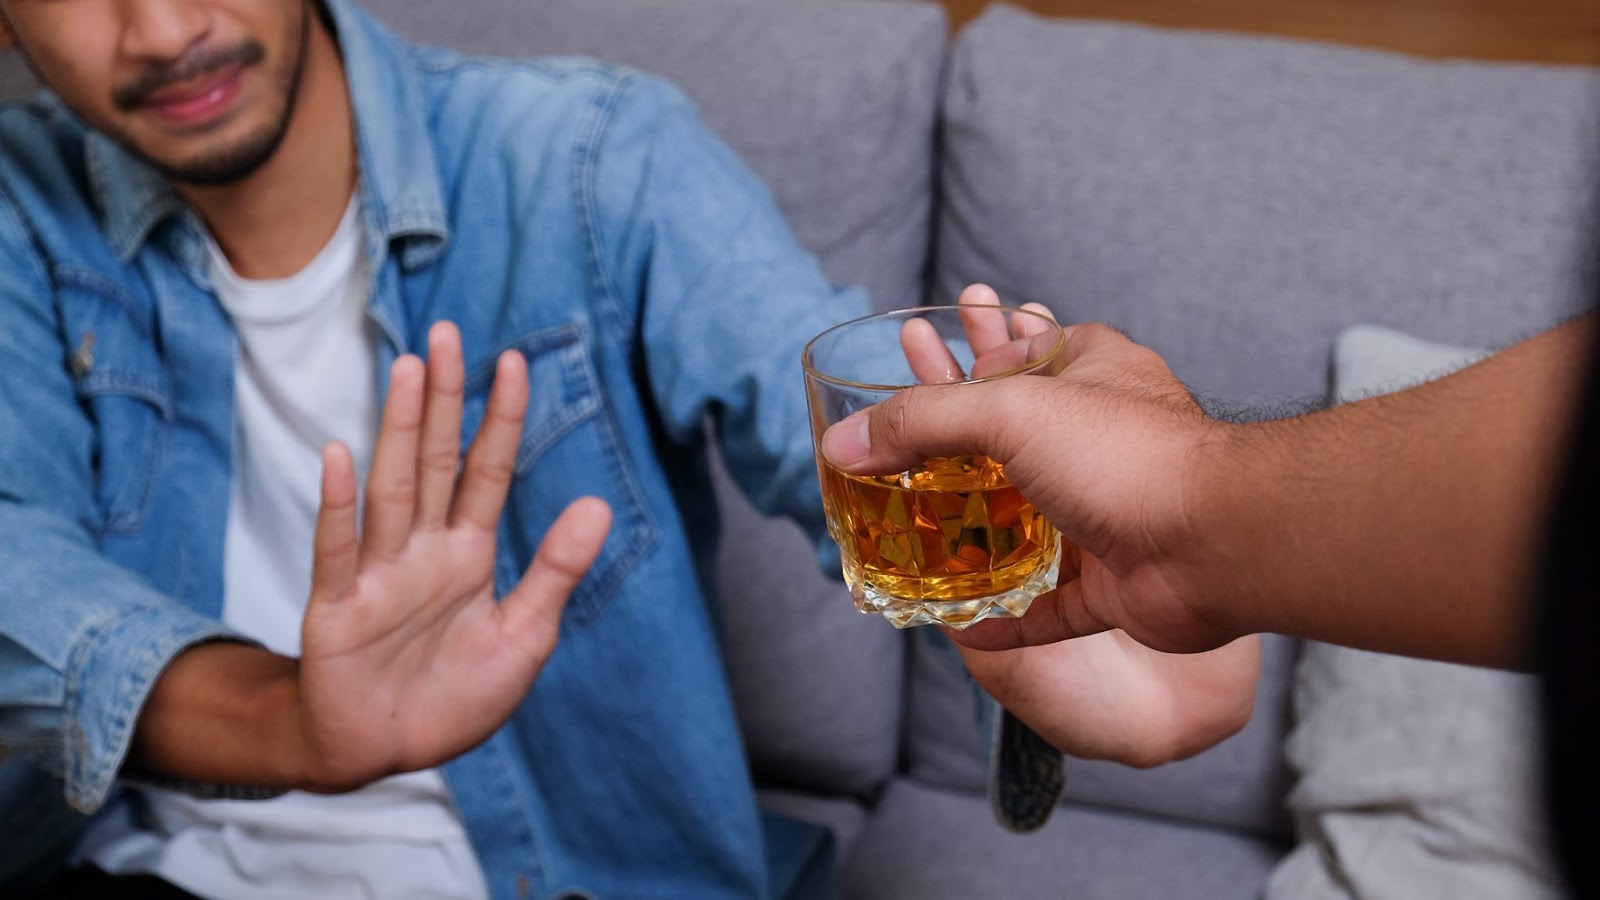 Quitting Drinking after prostate surgery